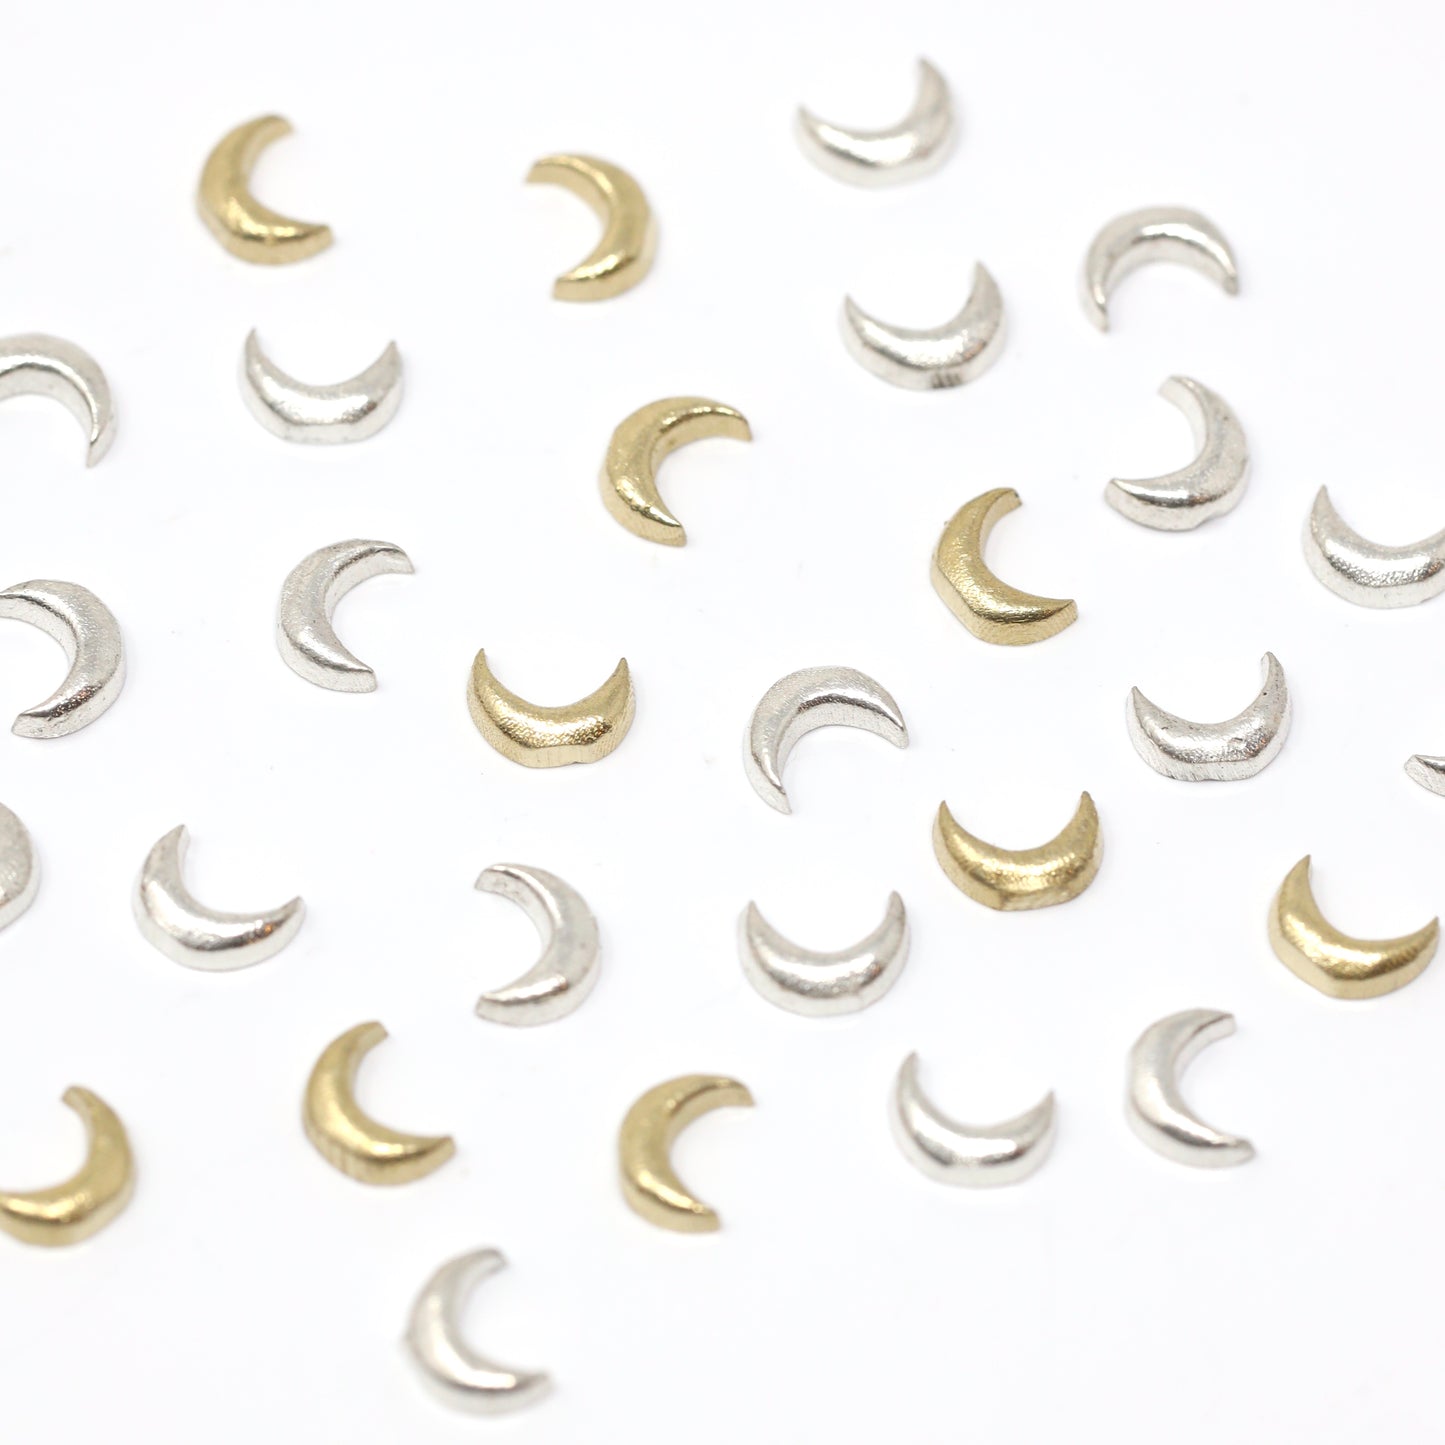 Tiny Crescent Moon Accent Charm Embellishments for Soldering or Jewelry Making